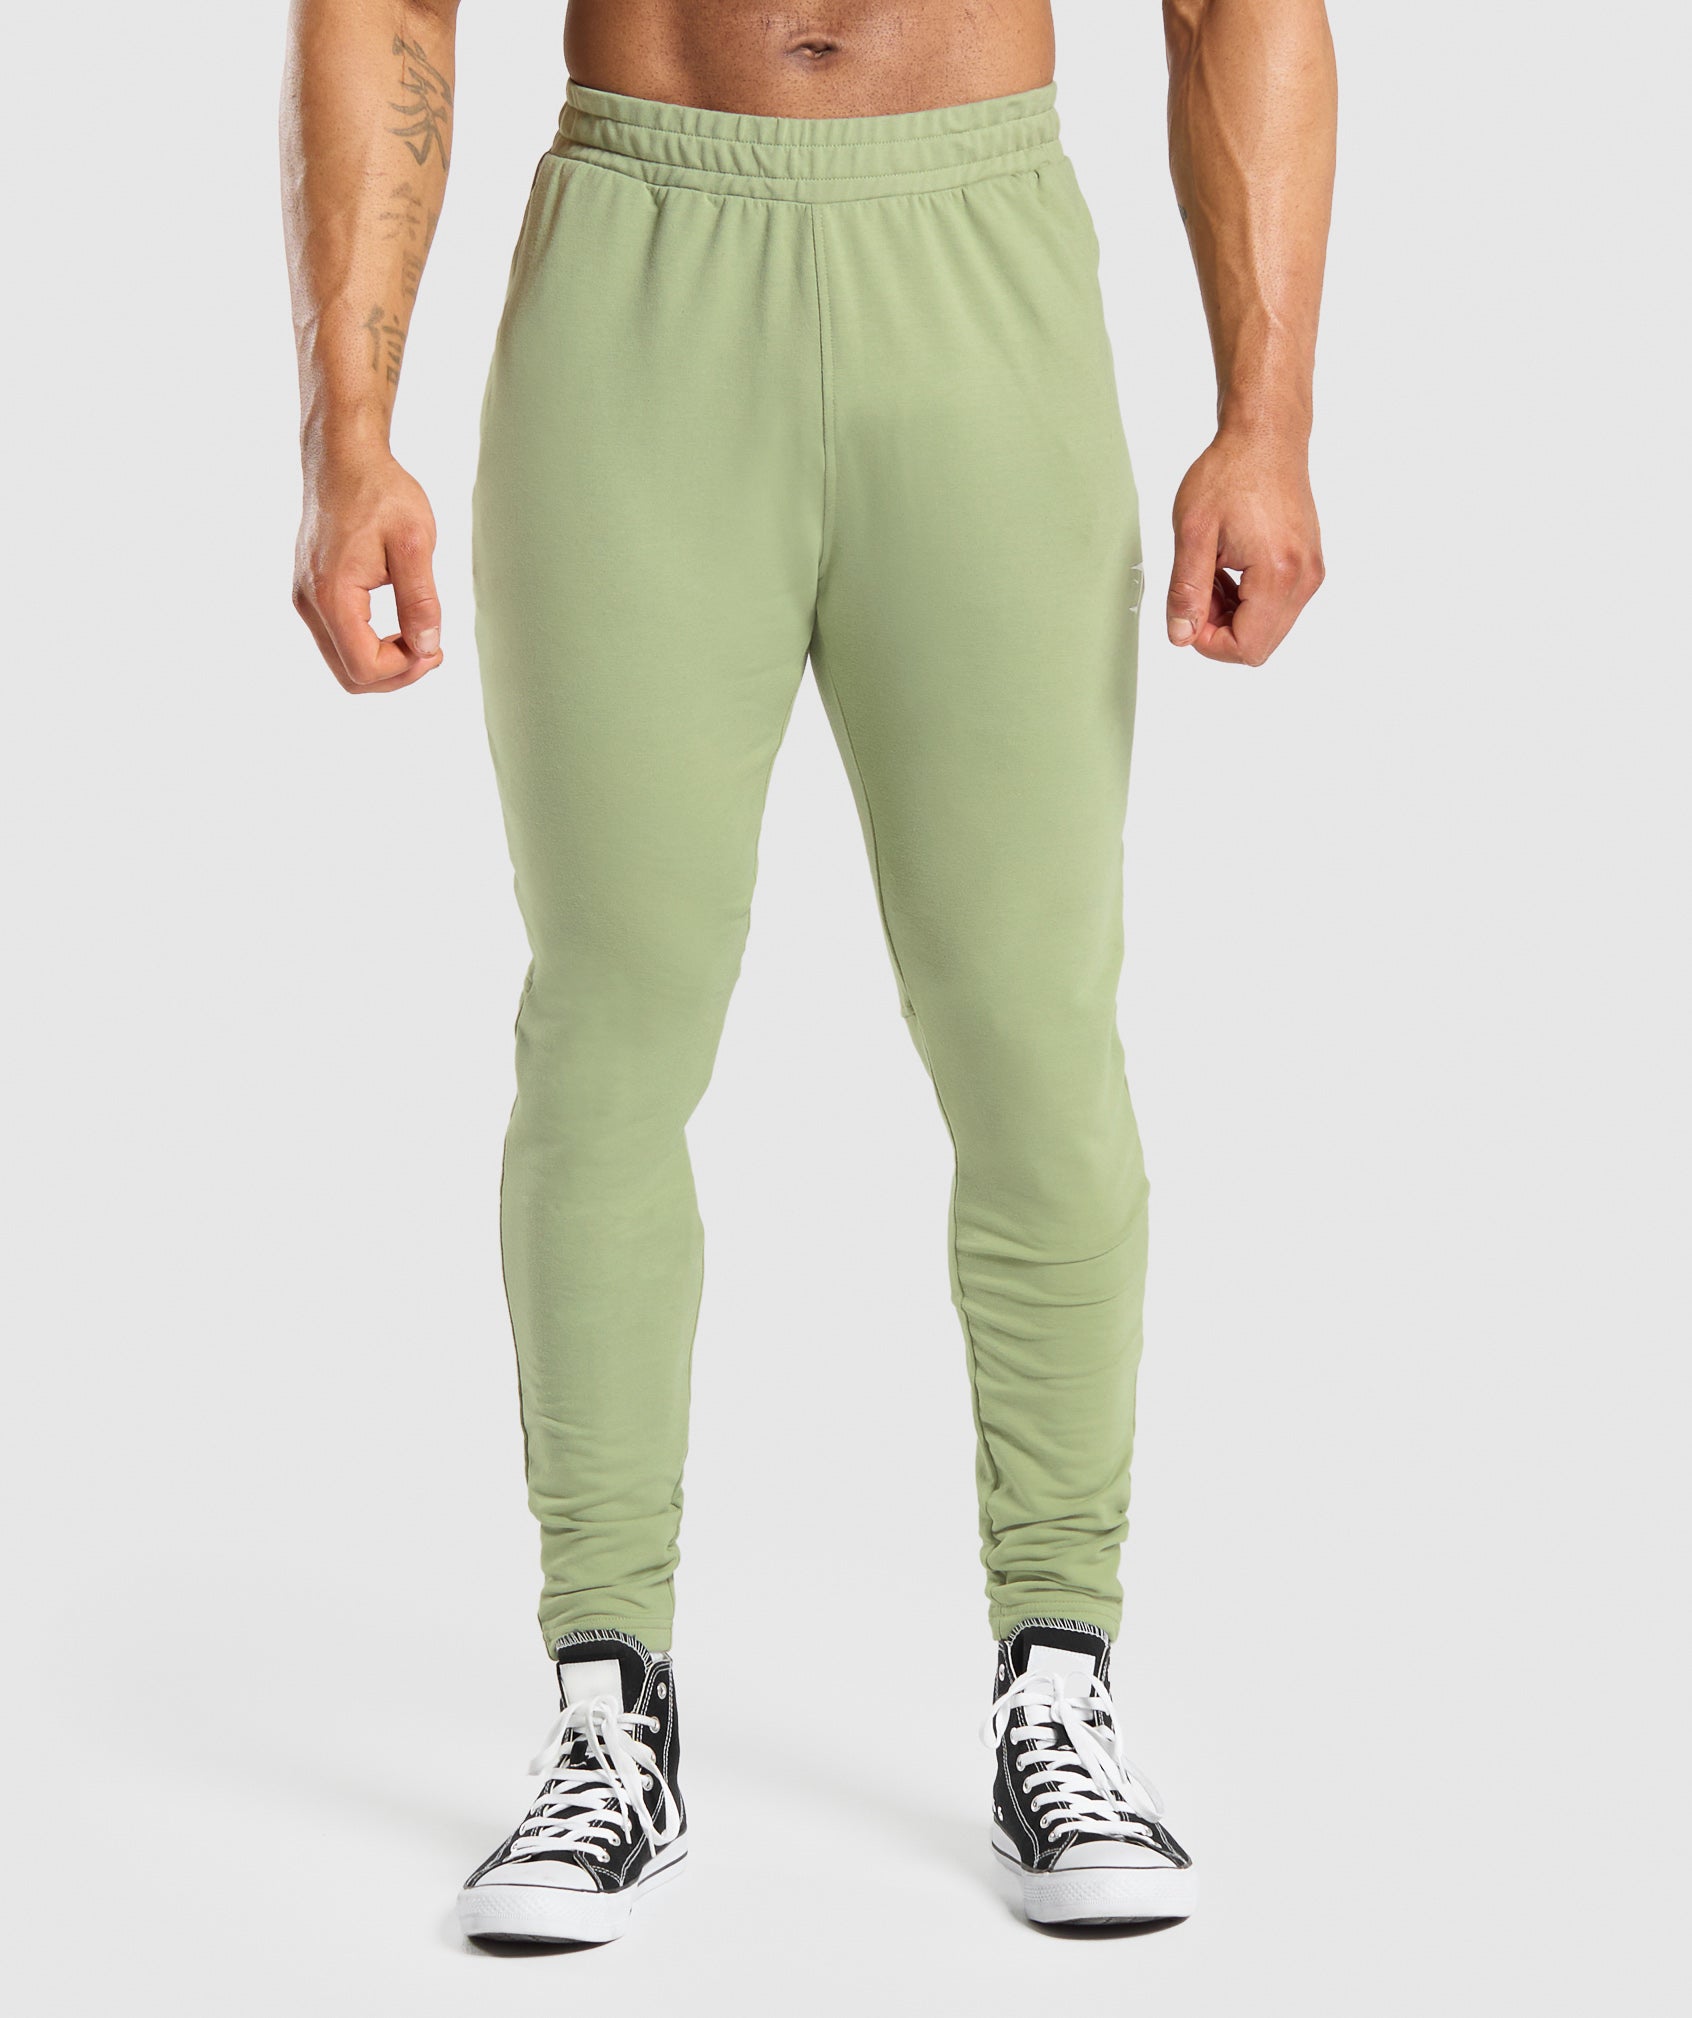 Essential Muscle Joggers in Natural Sage Green